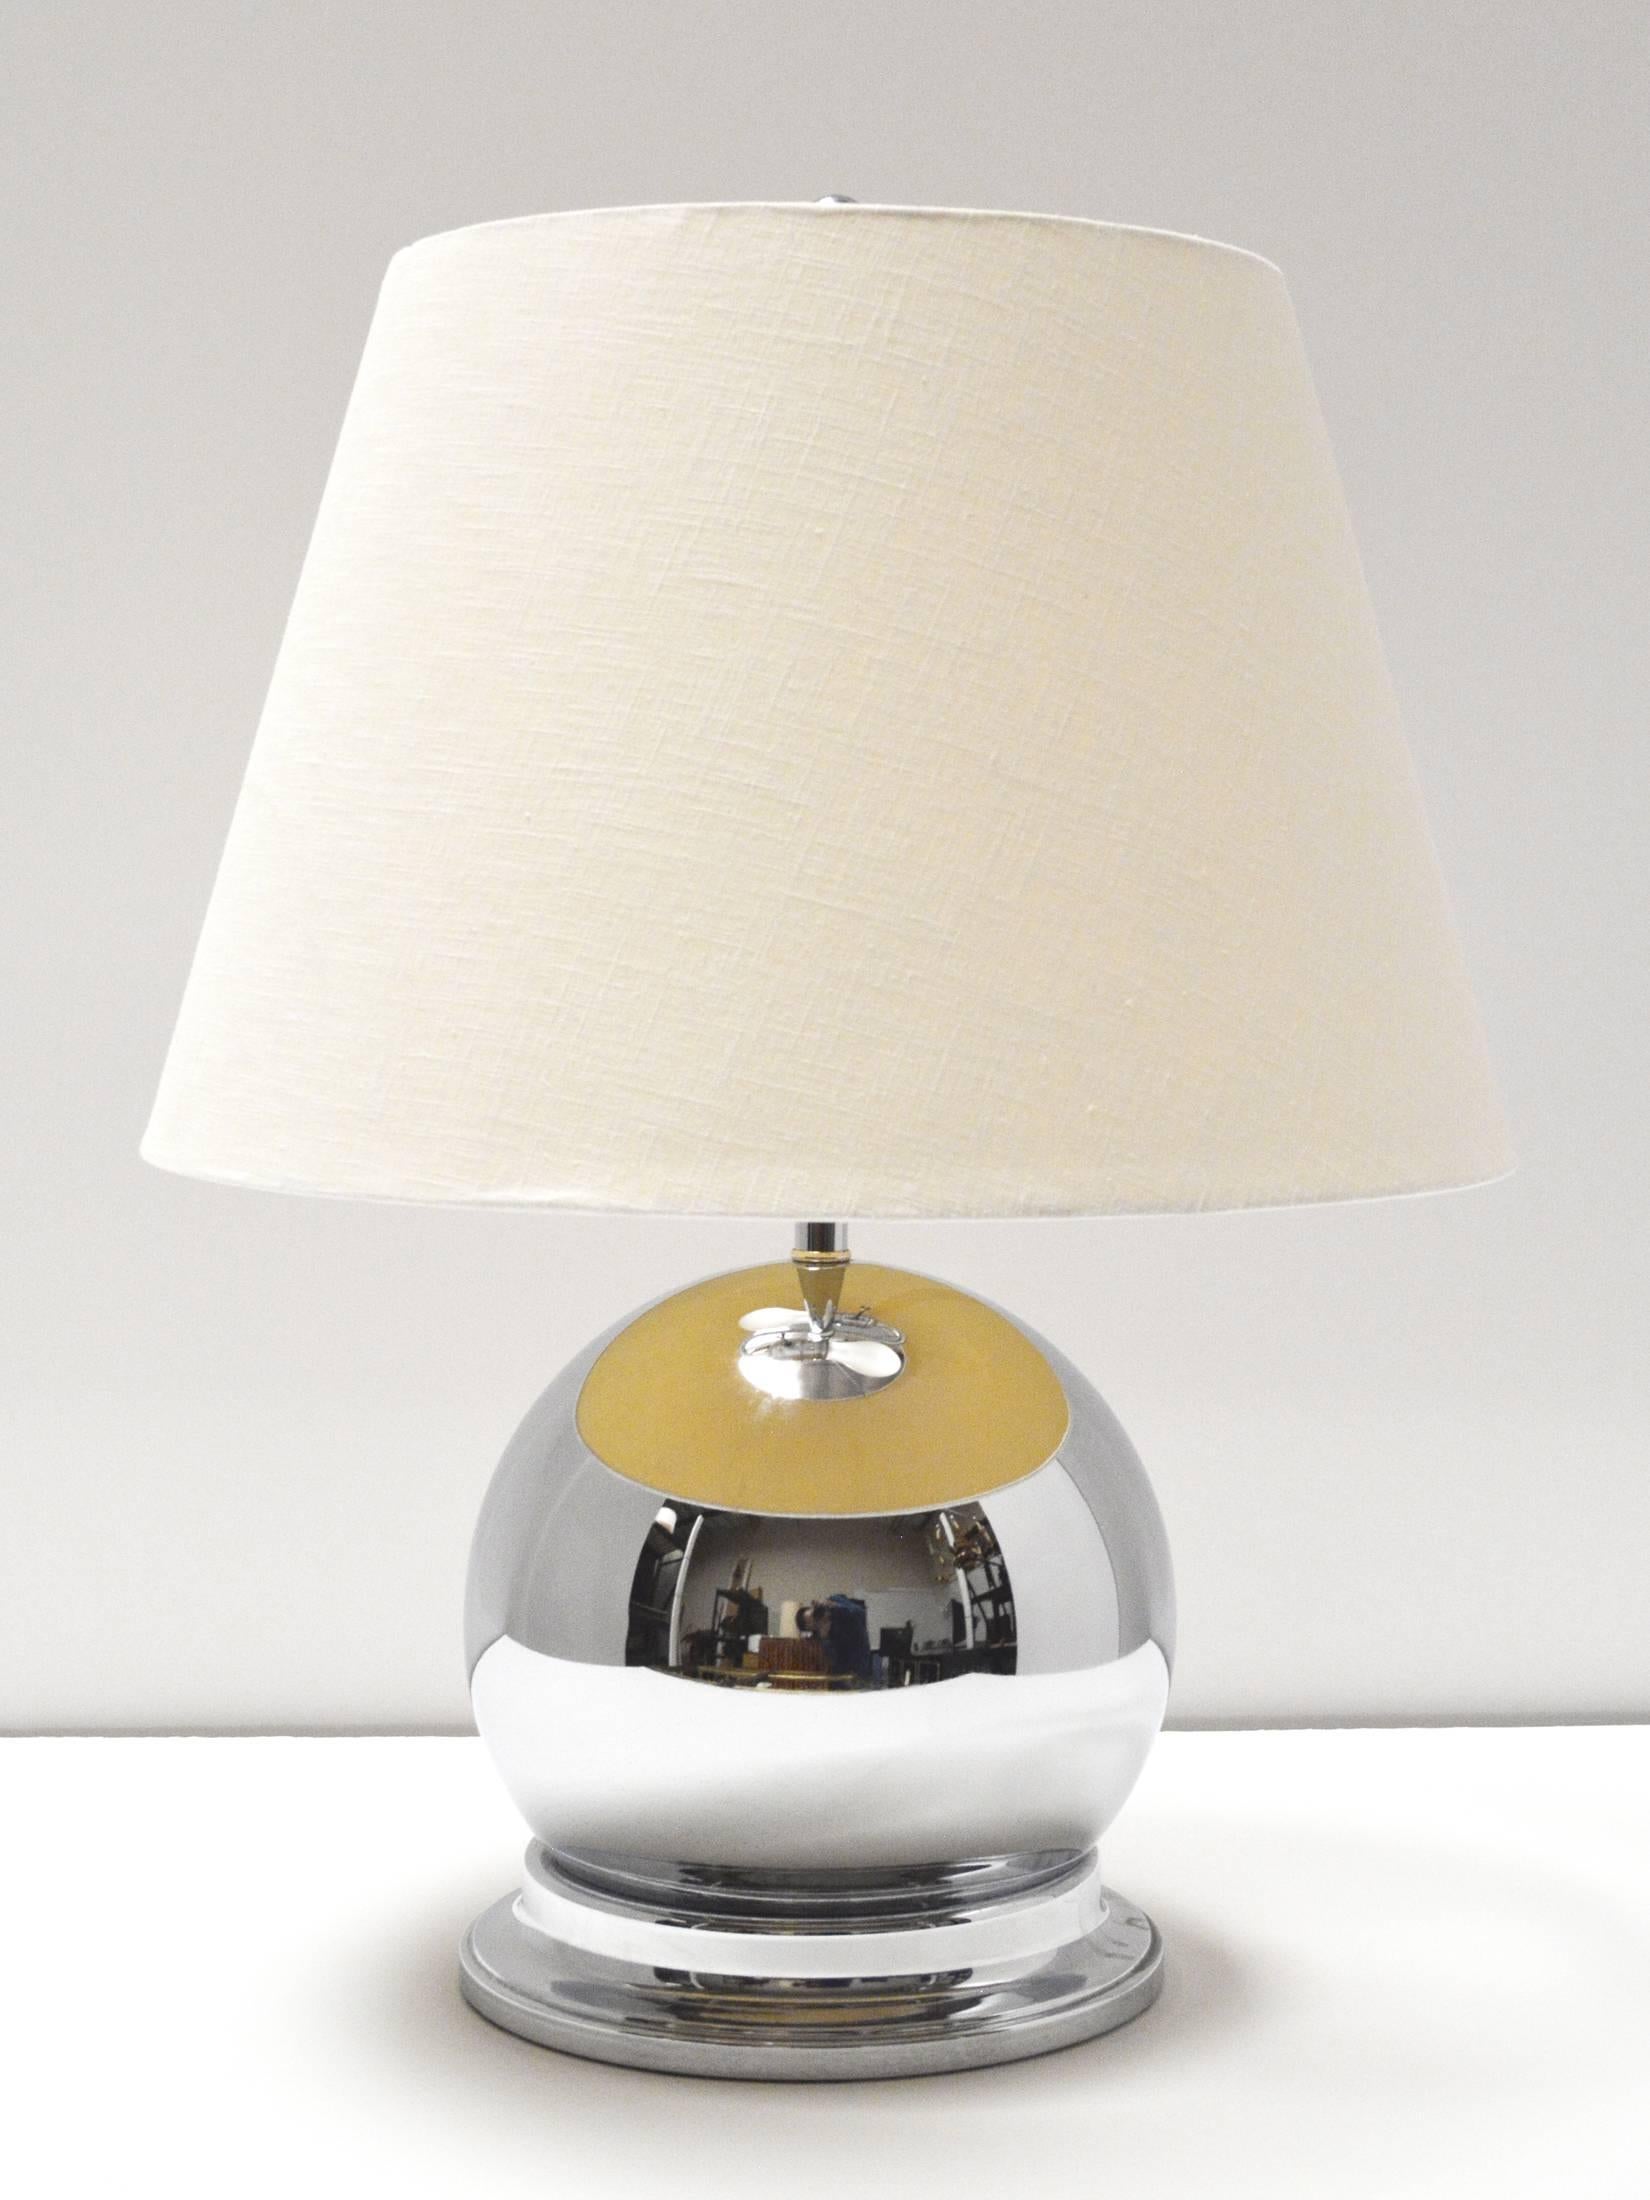 A chic pair of 1980s chrome ball lamps. Double sockets, excellent quality, labeled Norman Perry Lamp Co. Shades for display only.